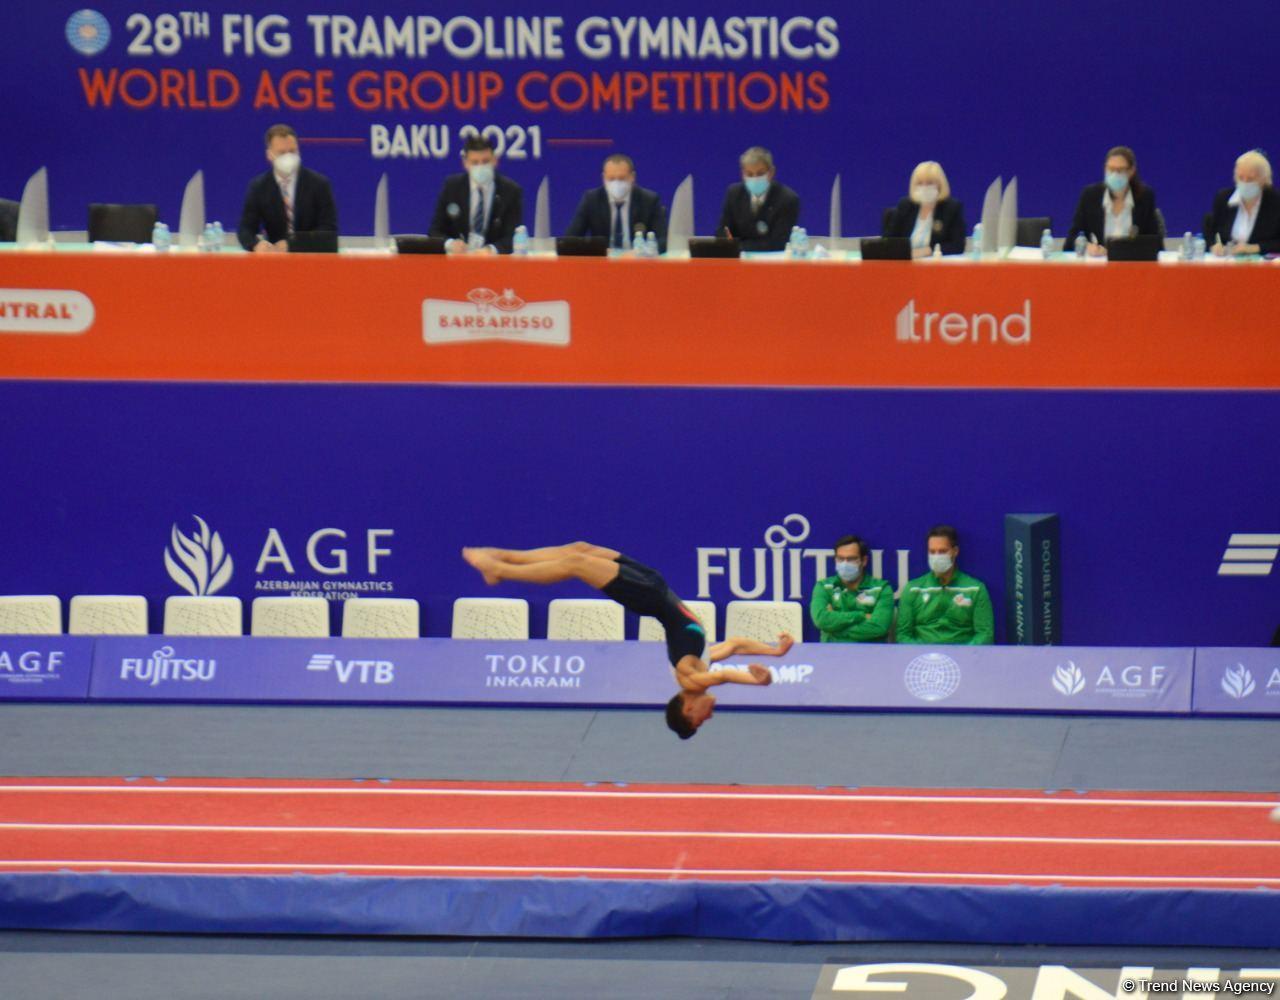 National gymnast reaches FIG World Age Group Competitions final